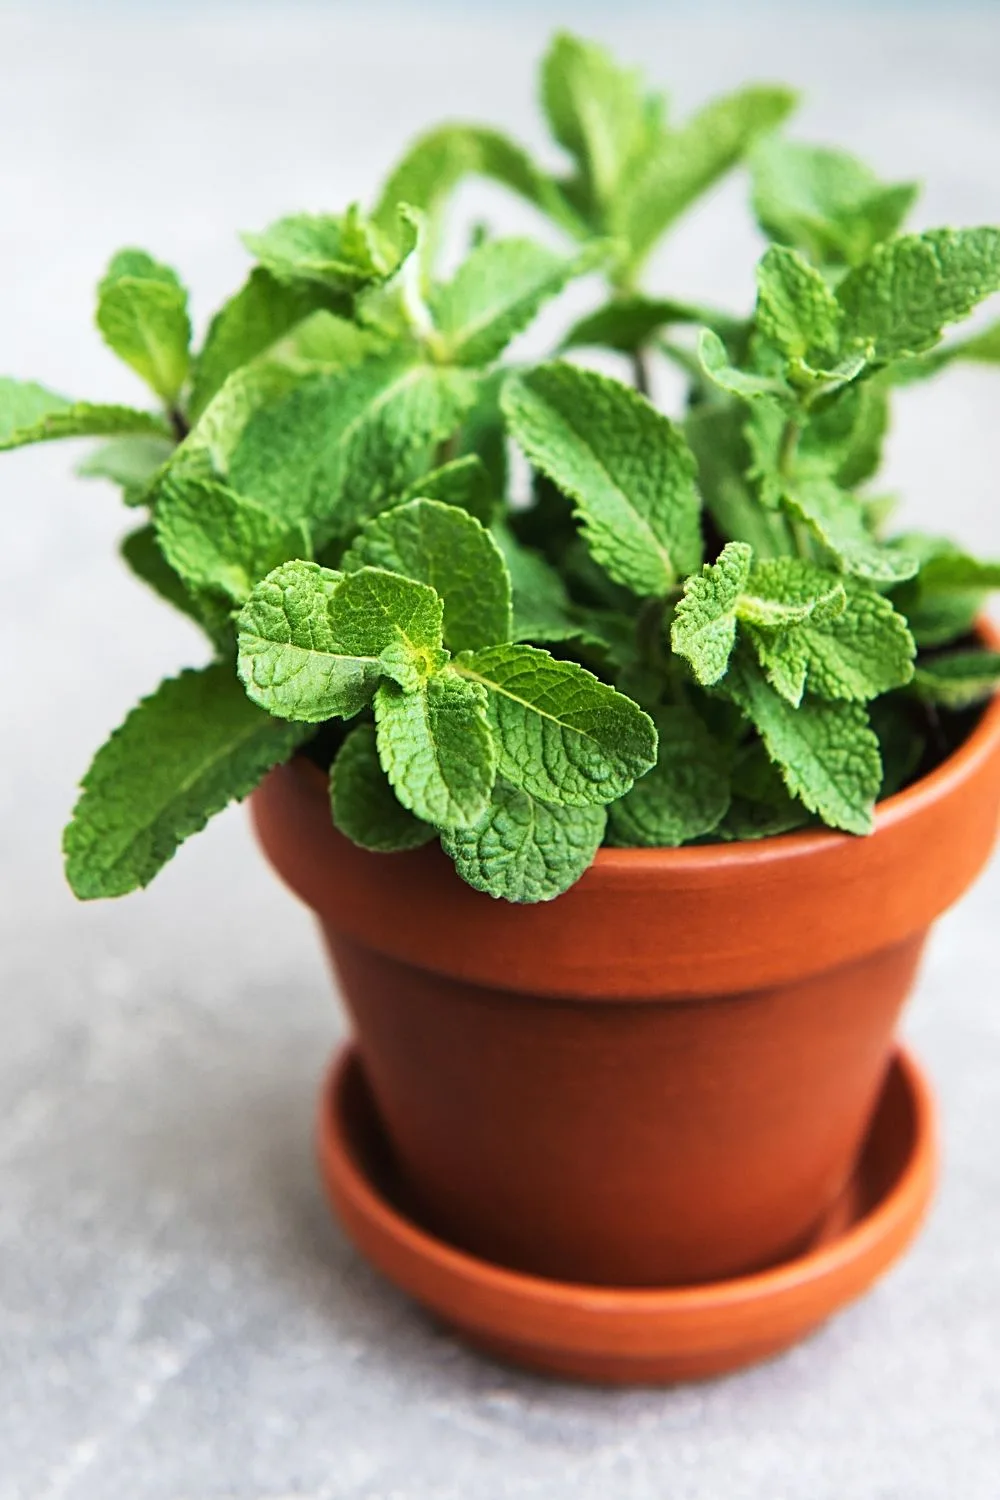 Mint is another perennial herb you can add to your east-facing balcony collection